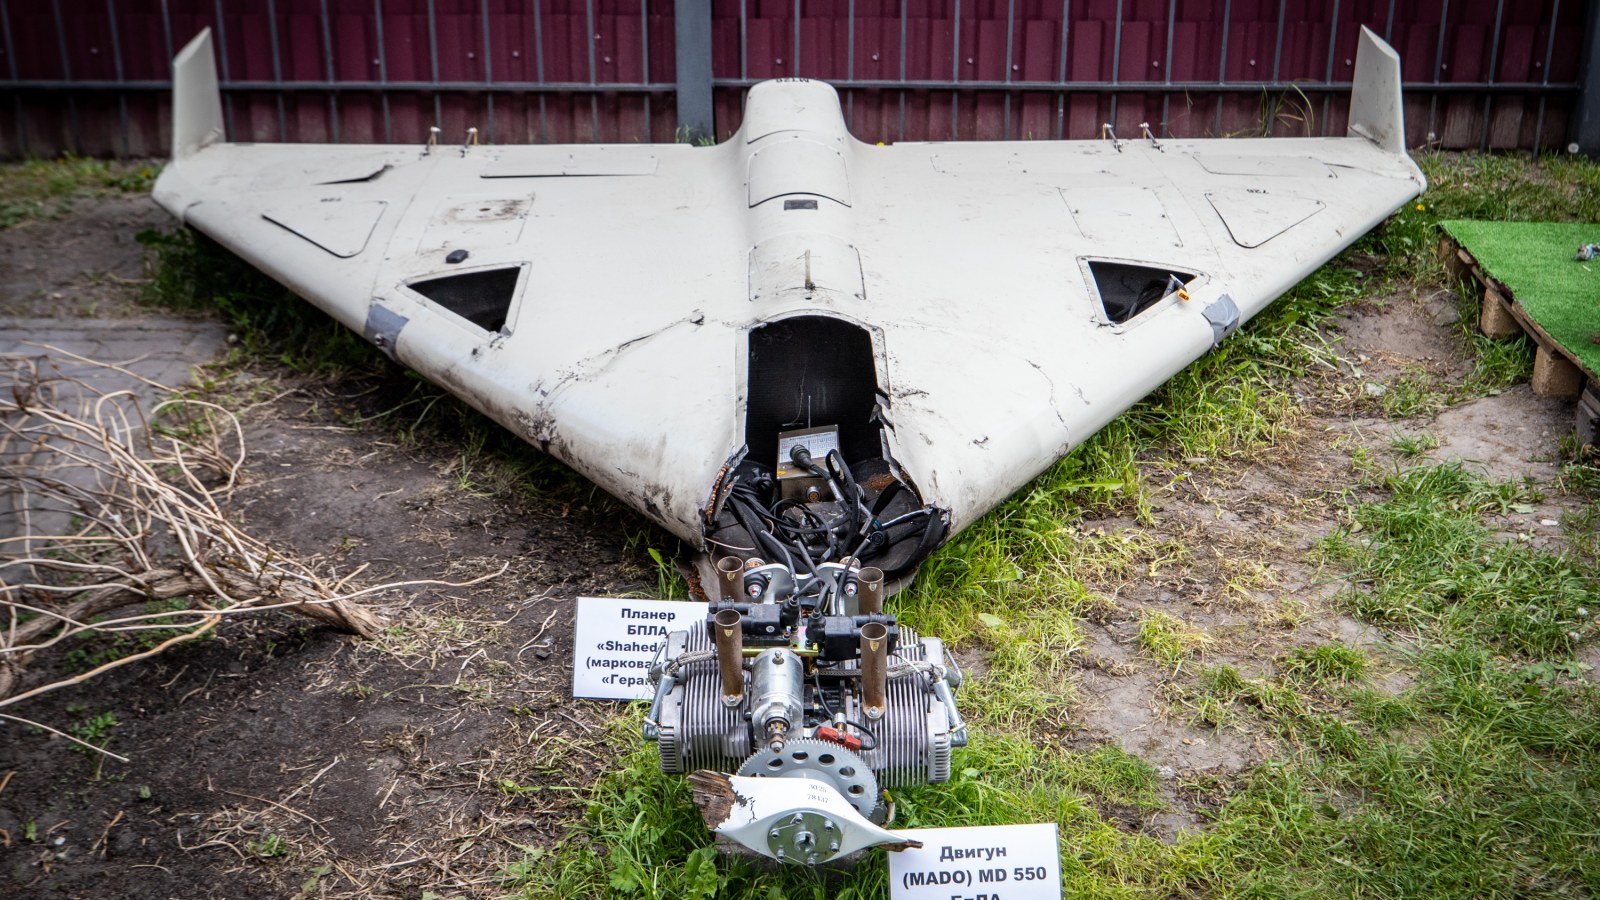 Russia has received a delivery of components for kamikaze drones from Iran